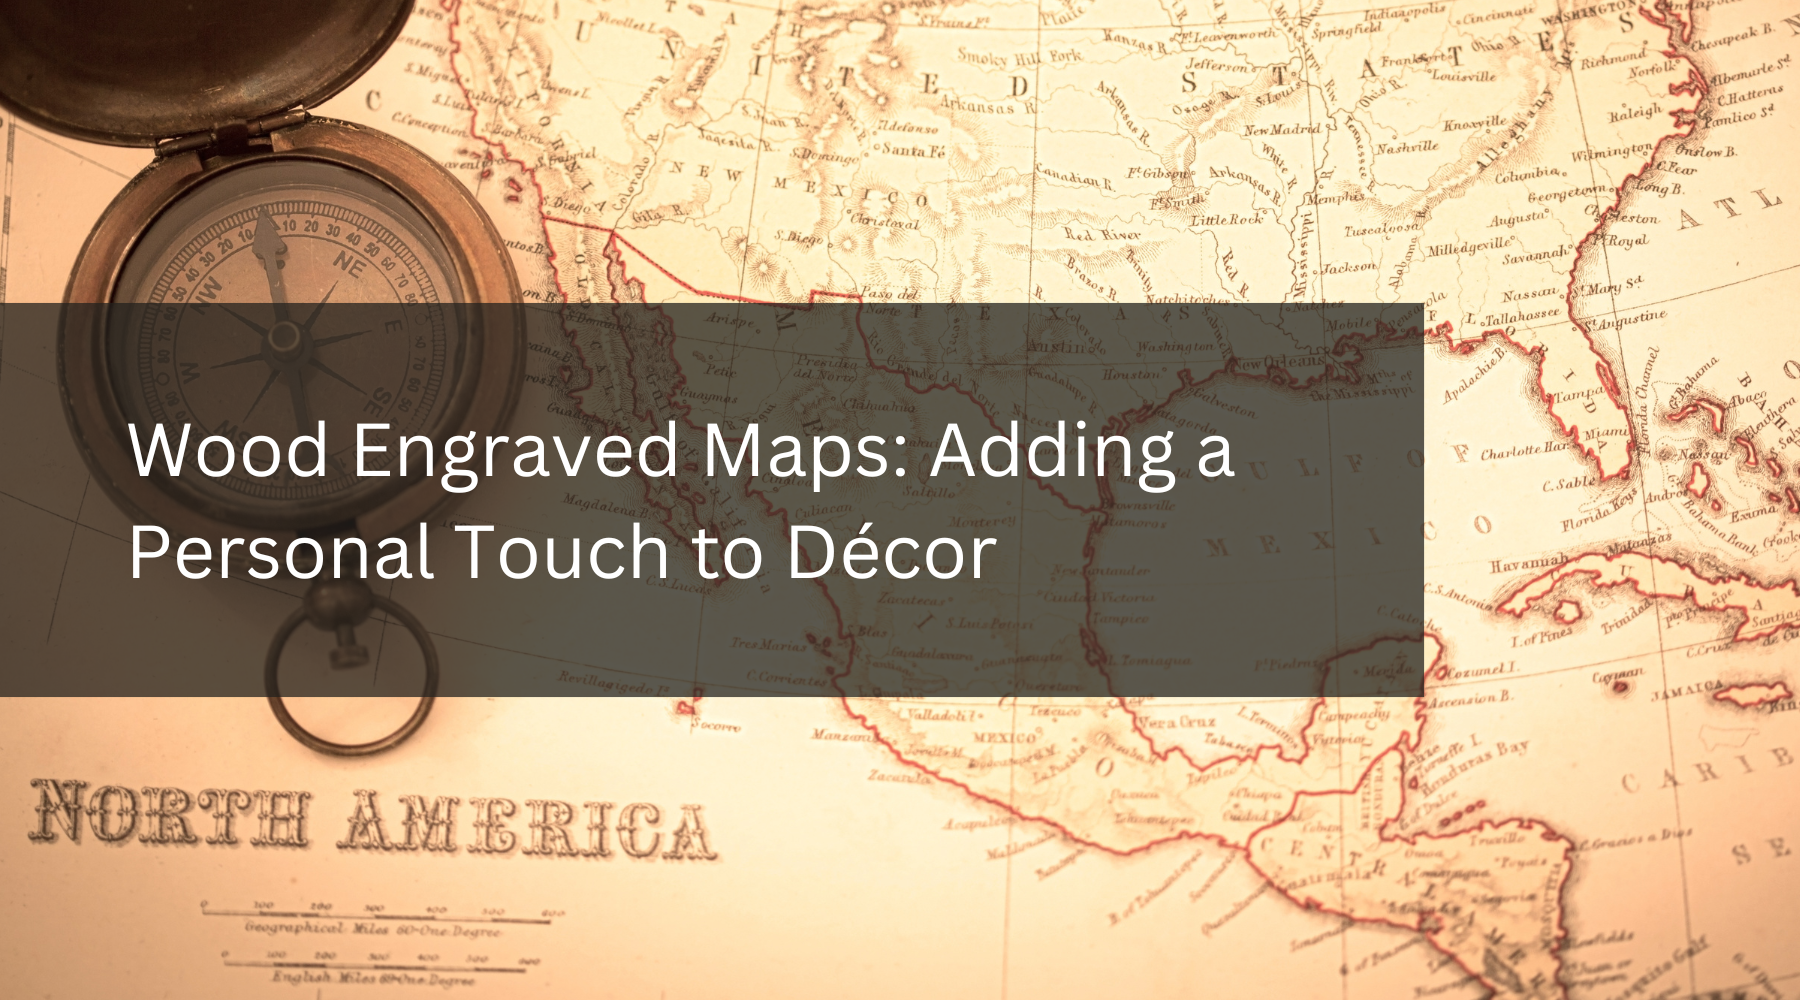 Wood Engraved Maps: Adding a Personal Touch to Décor